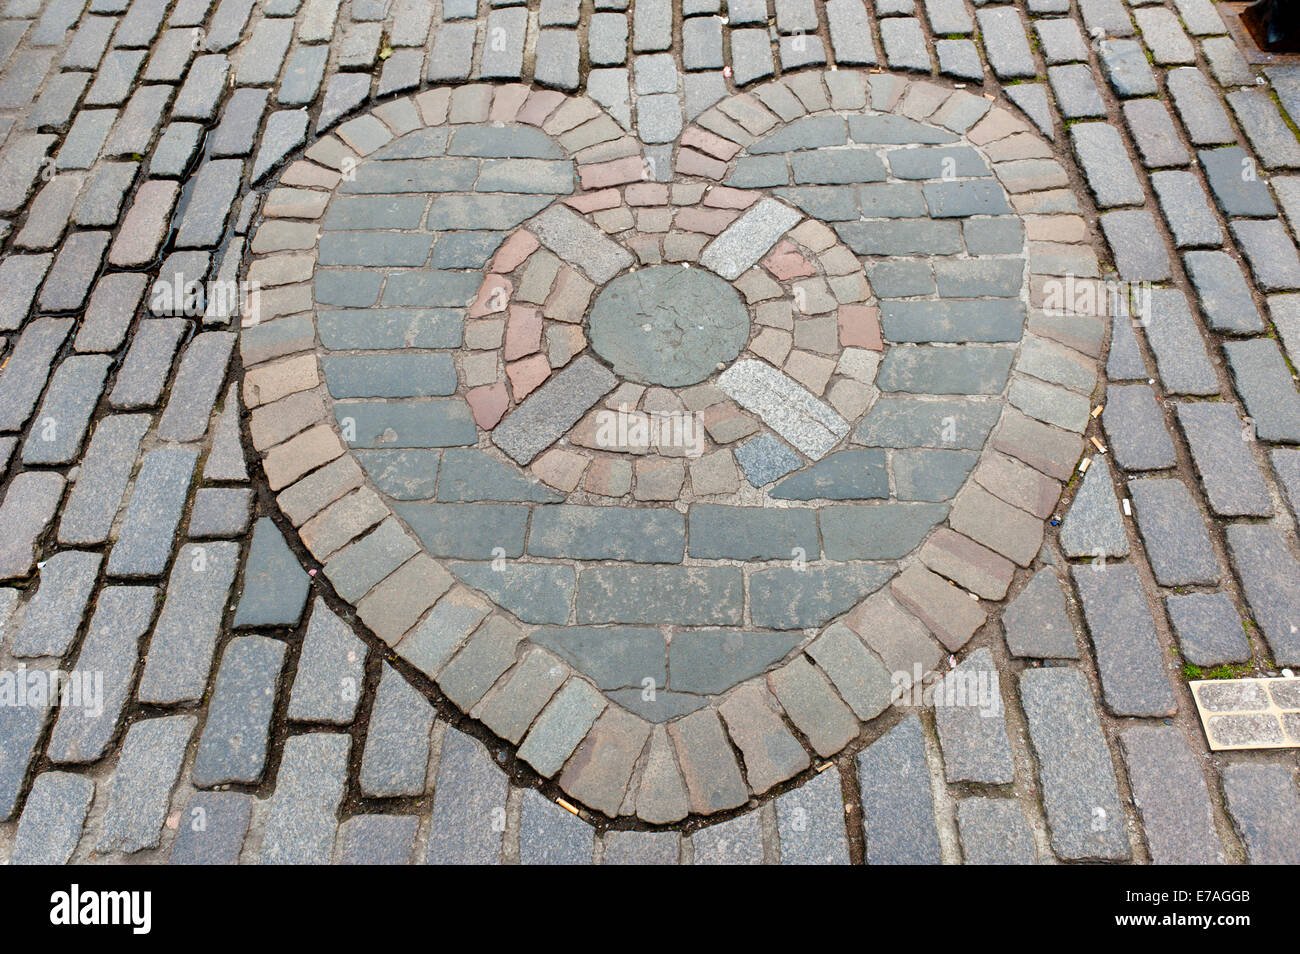 Heart of Midlothian, paving stones mosaic in front of St. Giles' Cathedral, High Street, Royal Mile, Edinburgh, Scotland Stock Photo